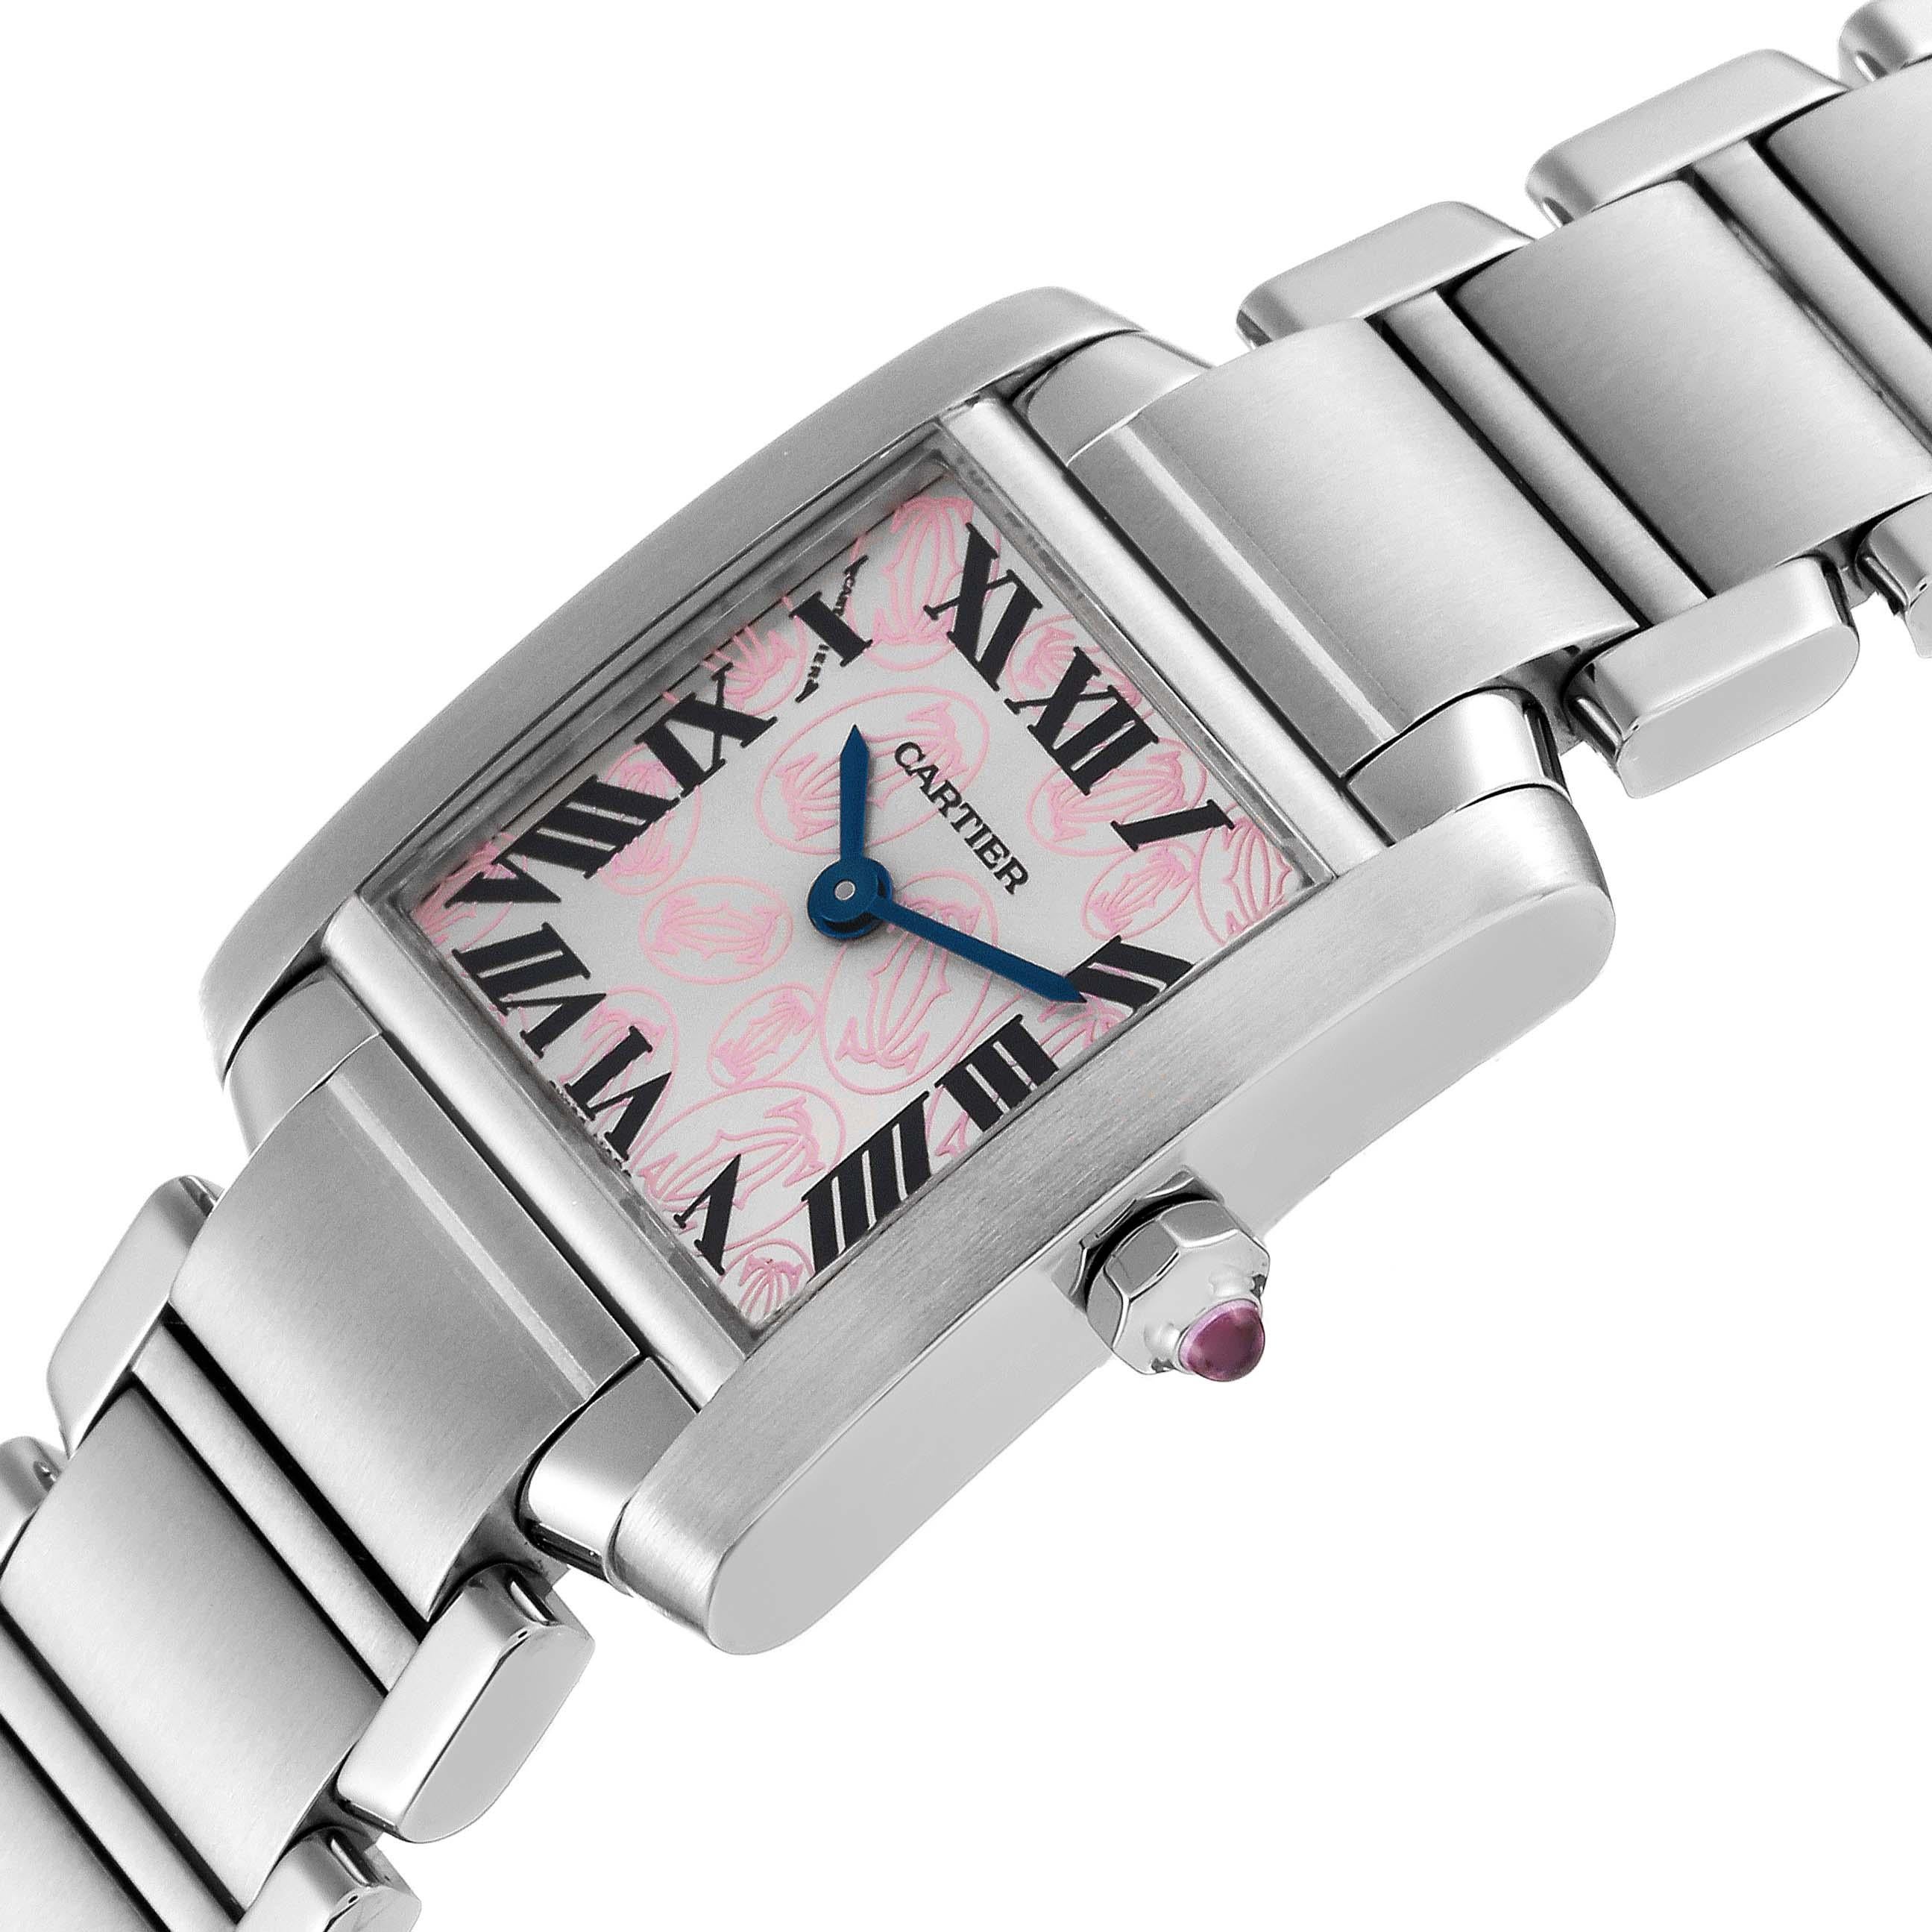 Cartier Tank Francaise Pink Double C Decor Limited Edition Steel Ladies Watch For Sale 2